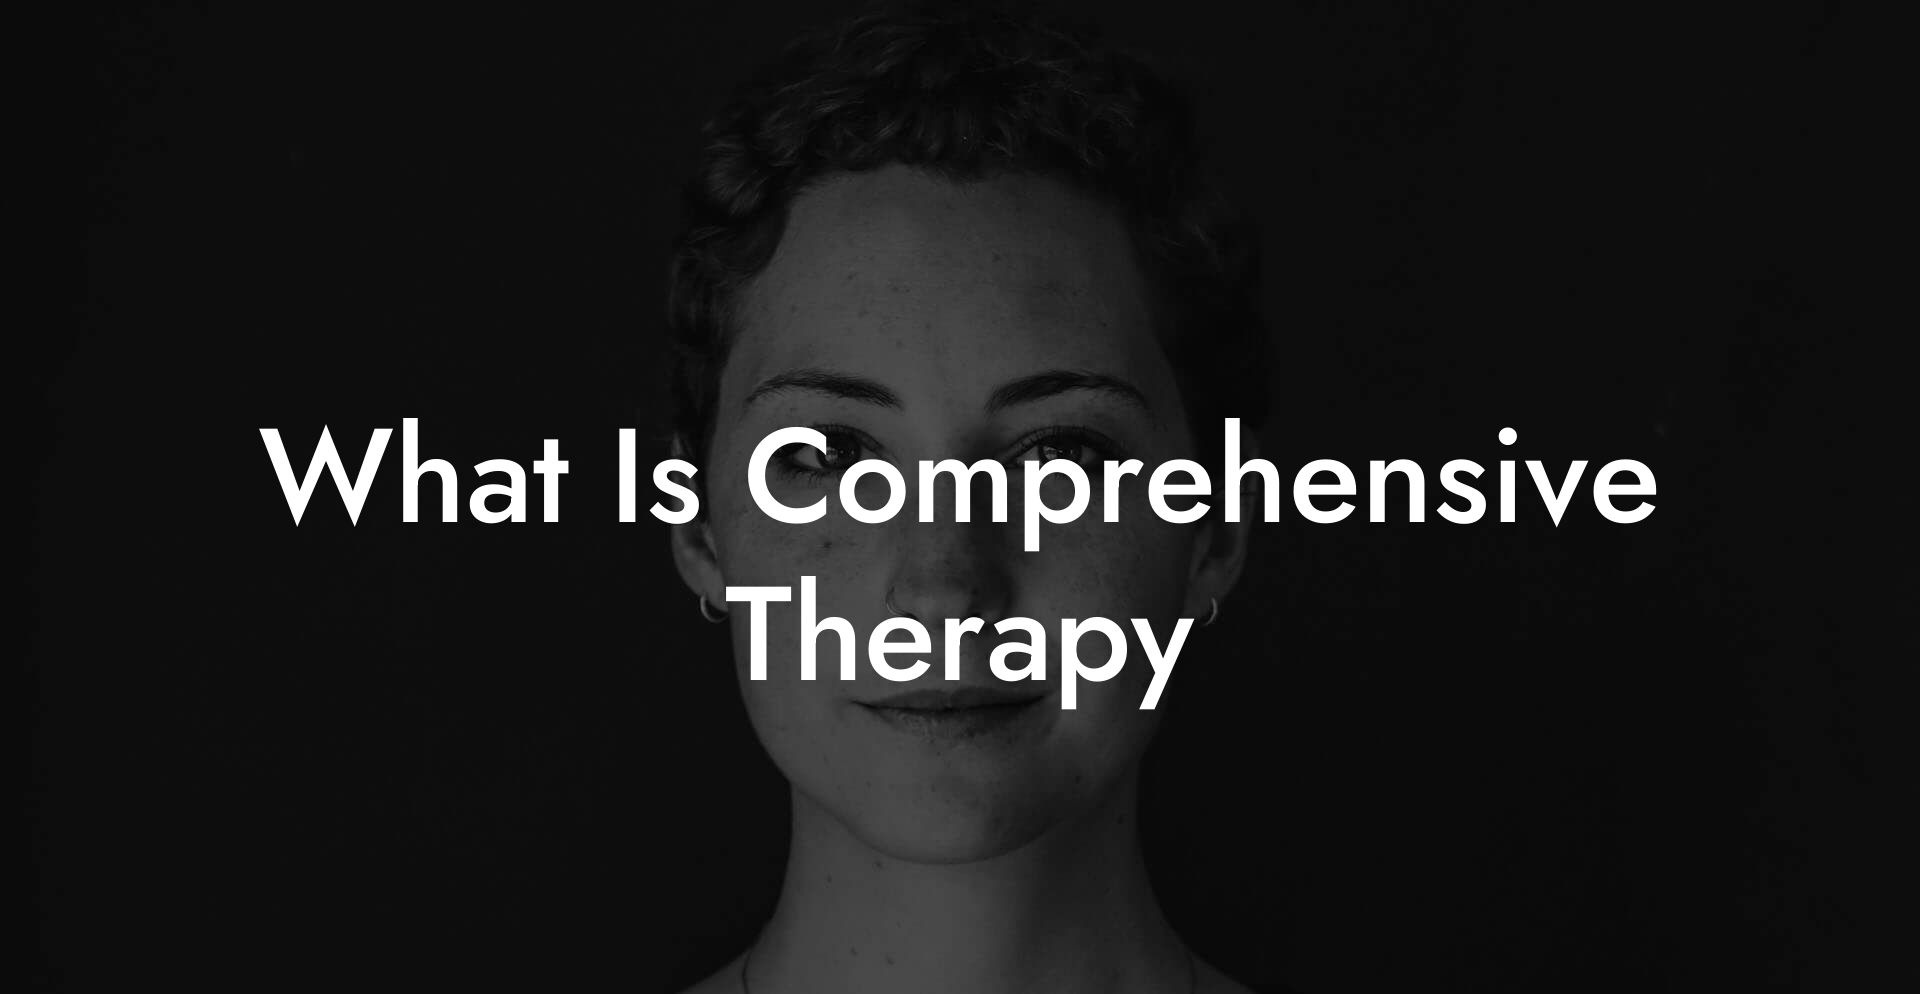 What Is Comprehensive Therapy